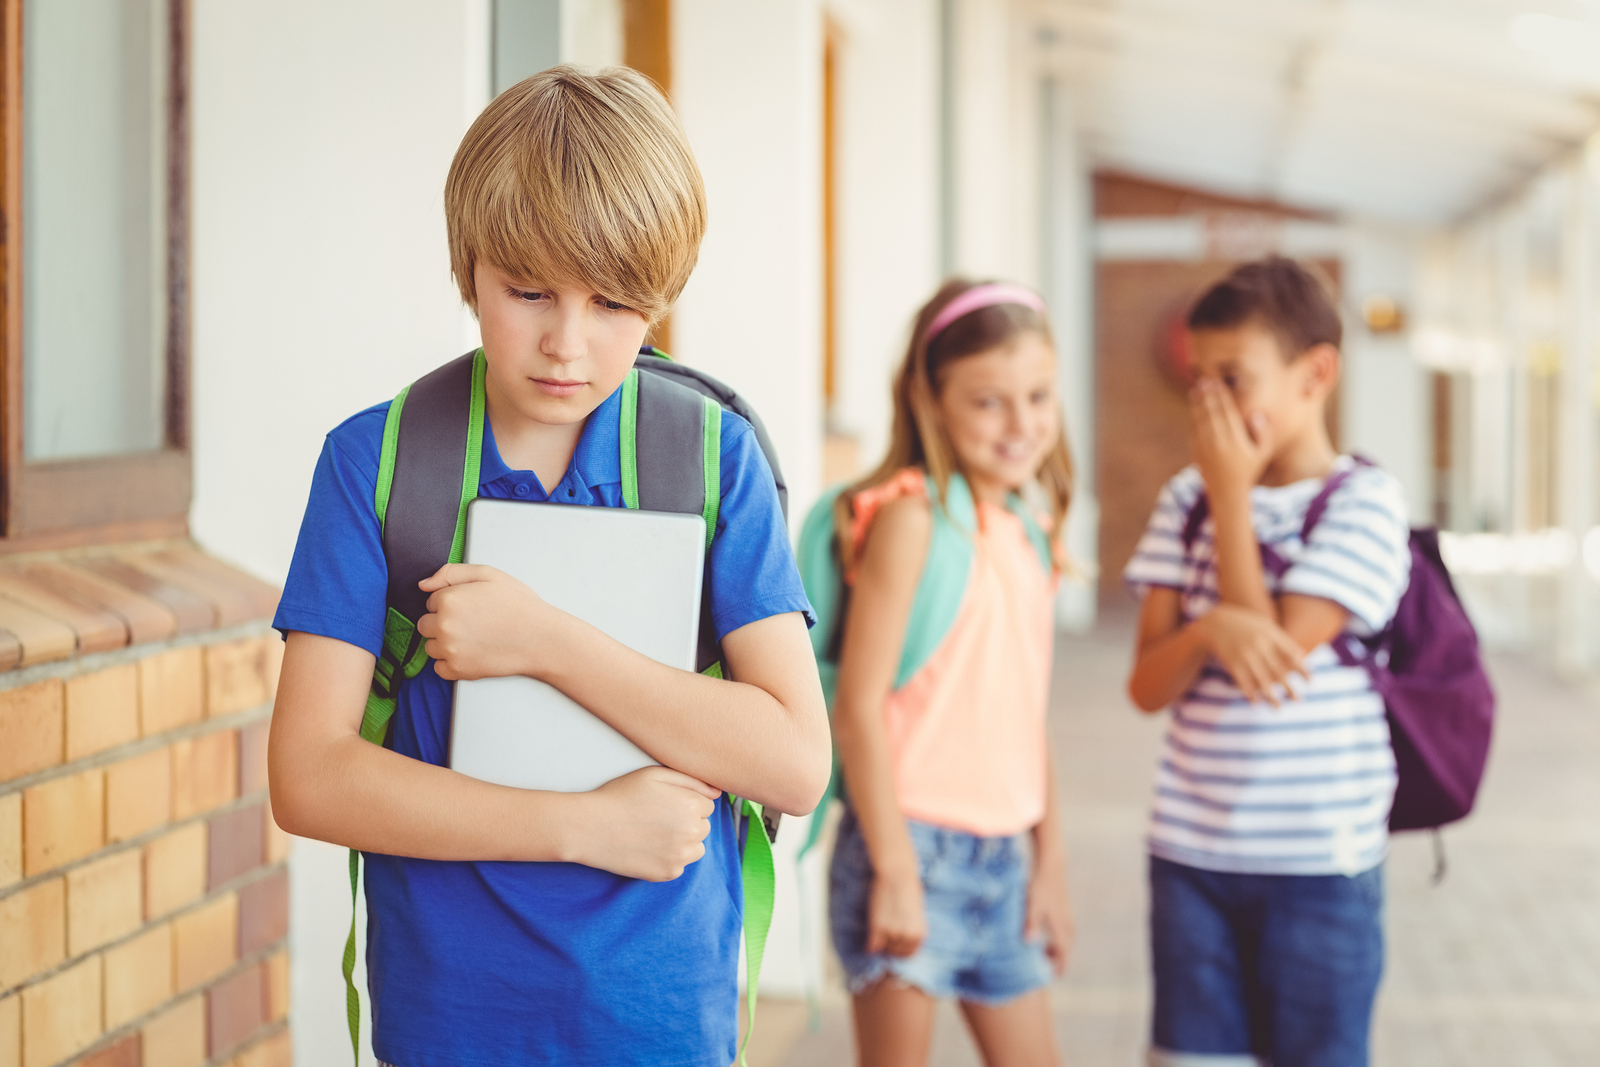 How to Stop Bullying Real Solutions for Kids and Parents